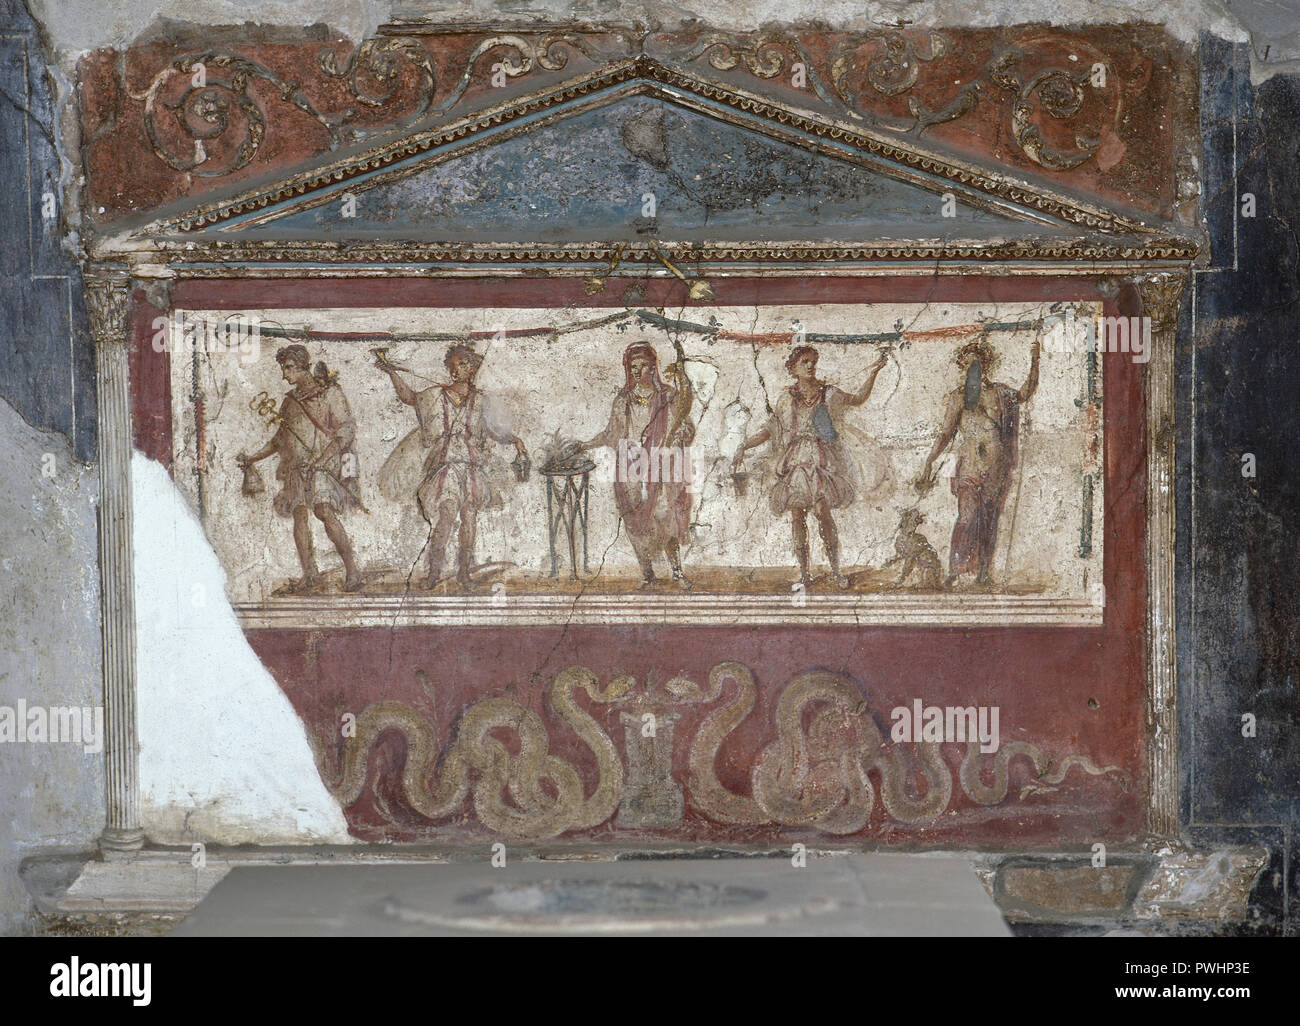 Pompeii. Lararium of the Thermopolium of Asellina. For a domestic cult. Frescoes depicting the Genius of the Pater Family among Lares (protective gods) making offerings. At his feet, the great serpent Agathodaimon. La Campania. Italy. Stock Photo